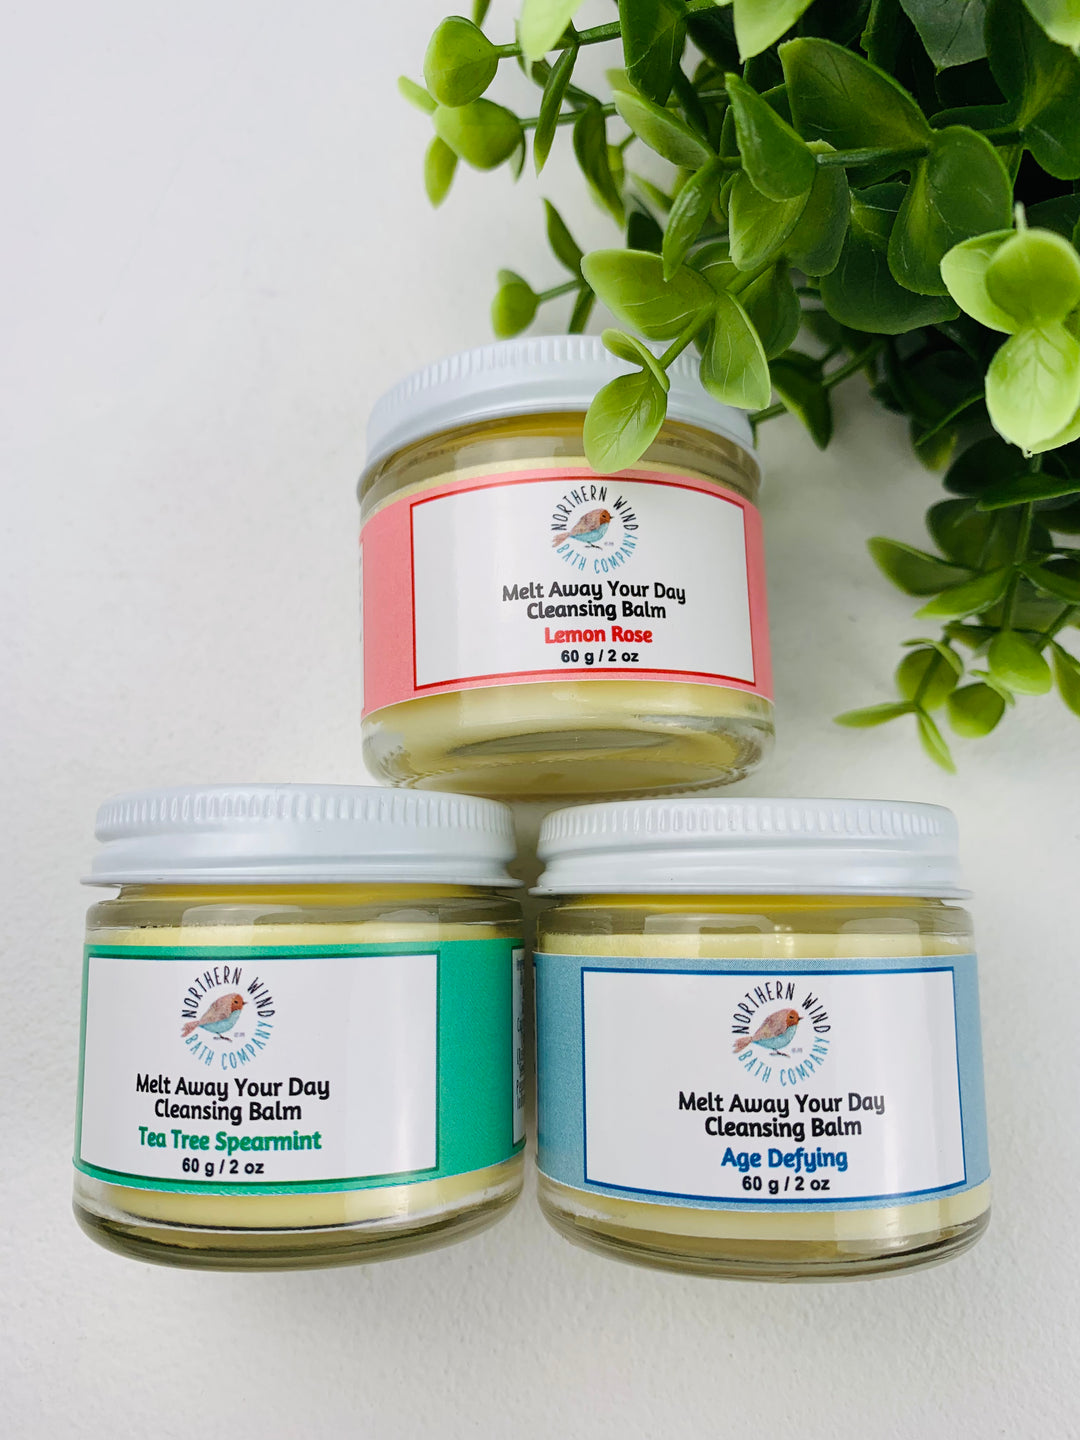 Northern Wind Bath Company, Melt Away Your Day Cleansing Balms